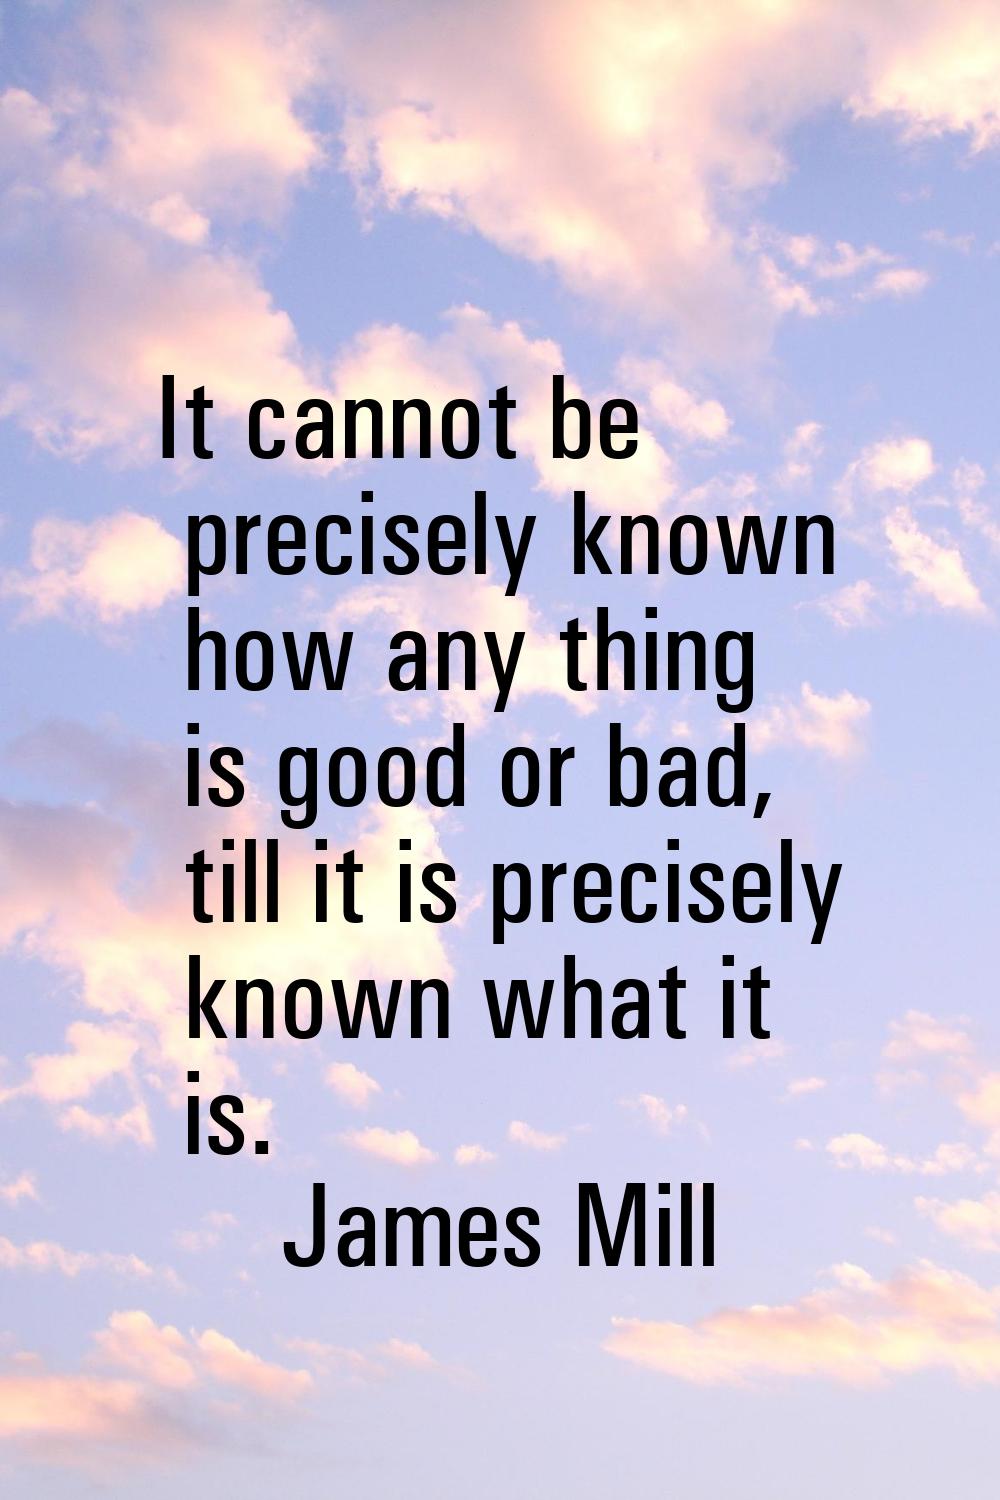 It cannot be precisely known how any thing is good or bad, till it is precisely known what it is.